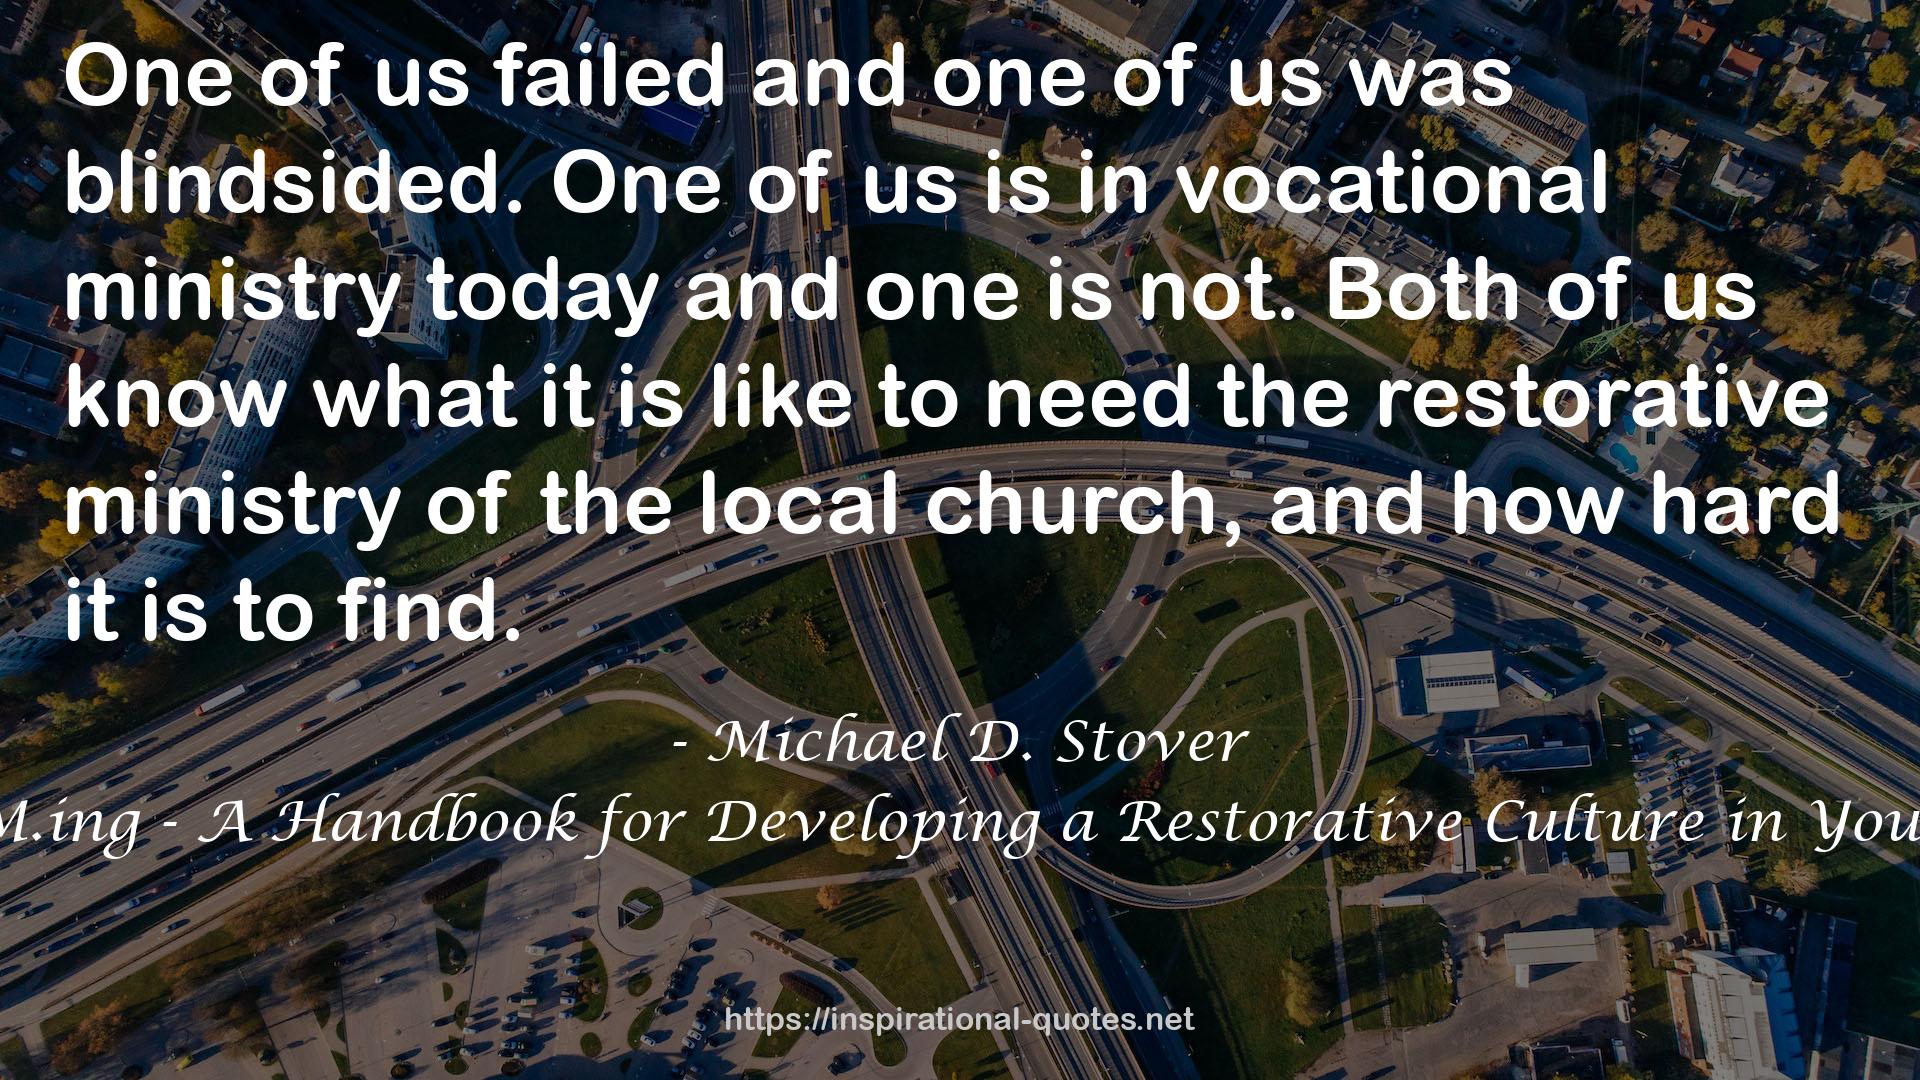 Michael D. Stover QUOTES